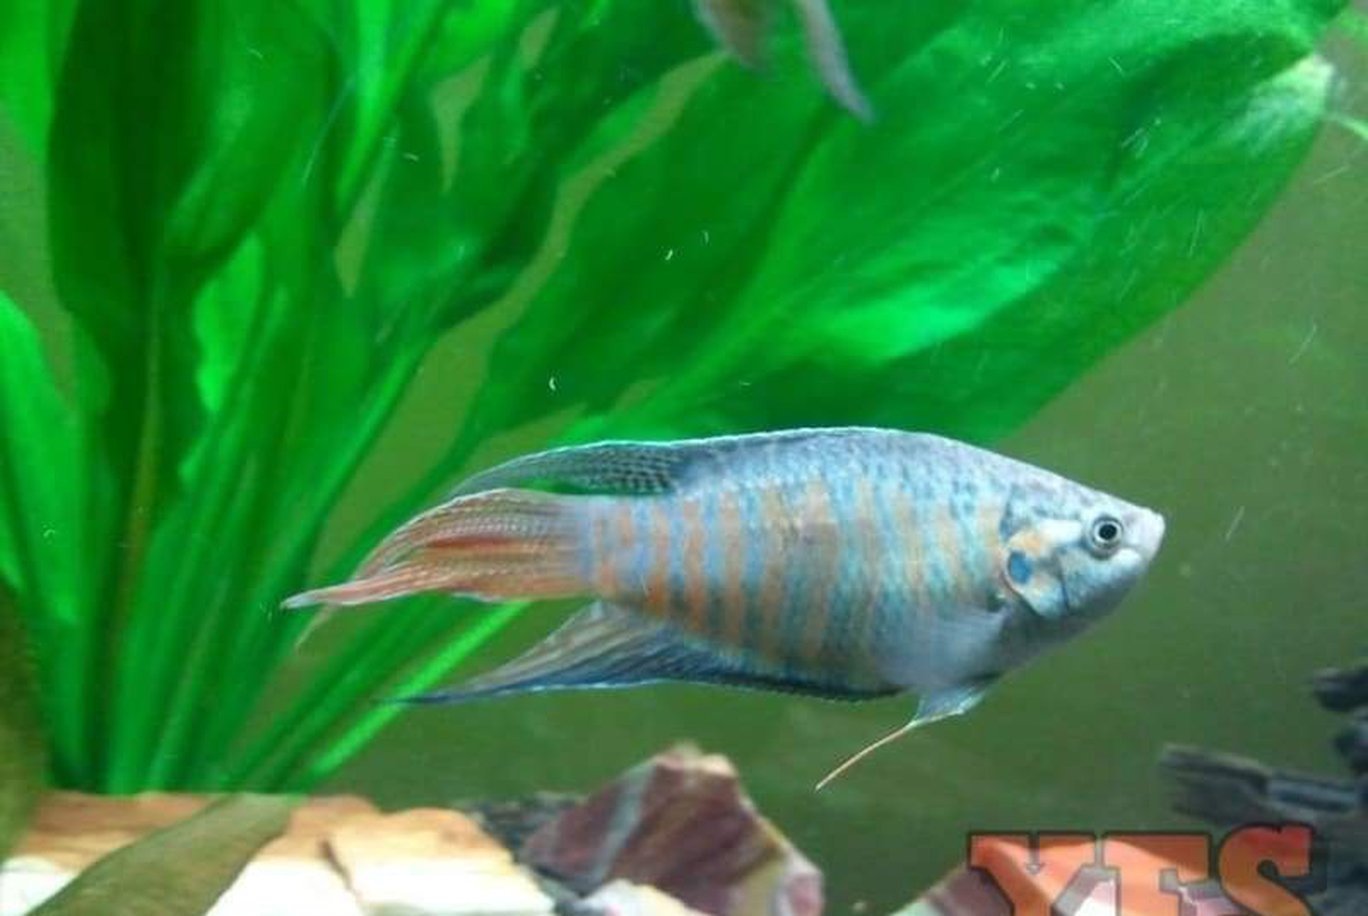 X10 Blue Paradise Package - Fish Live Sml/Med Bulk Save-Anabantoid - Gourami-www.YourFishStore.com